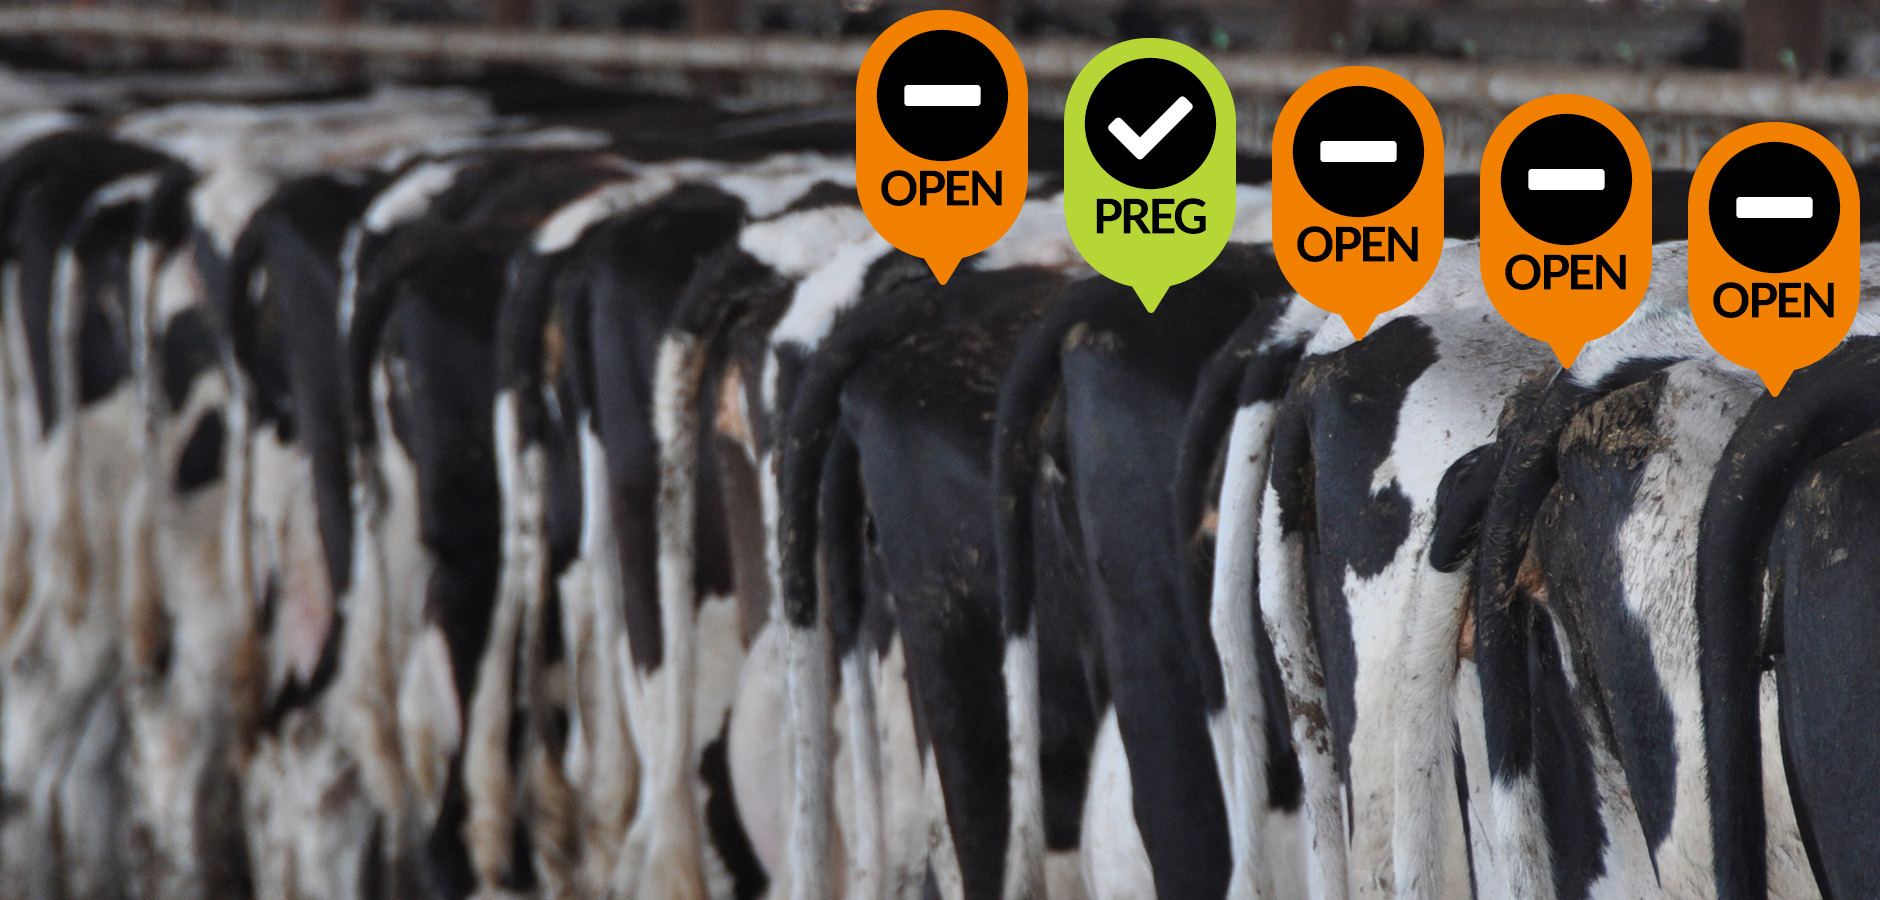 It shouldn’t be this hard to keep cows pregnant.